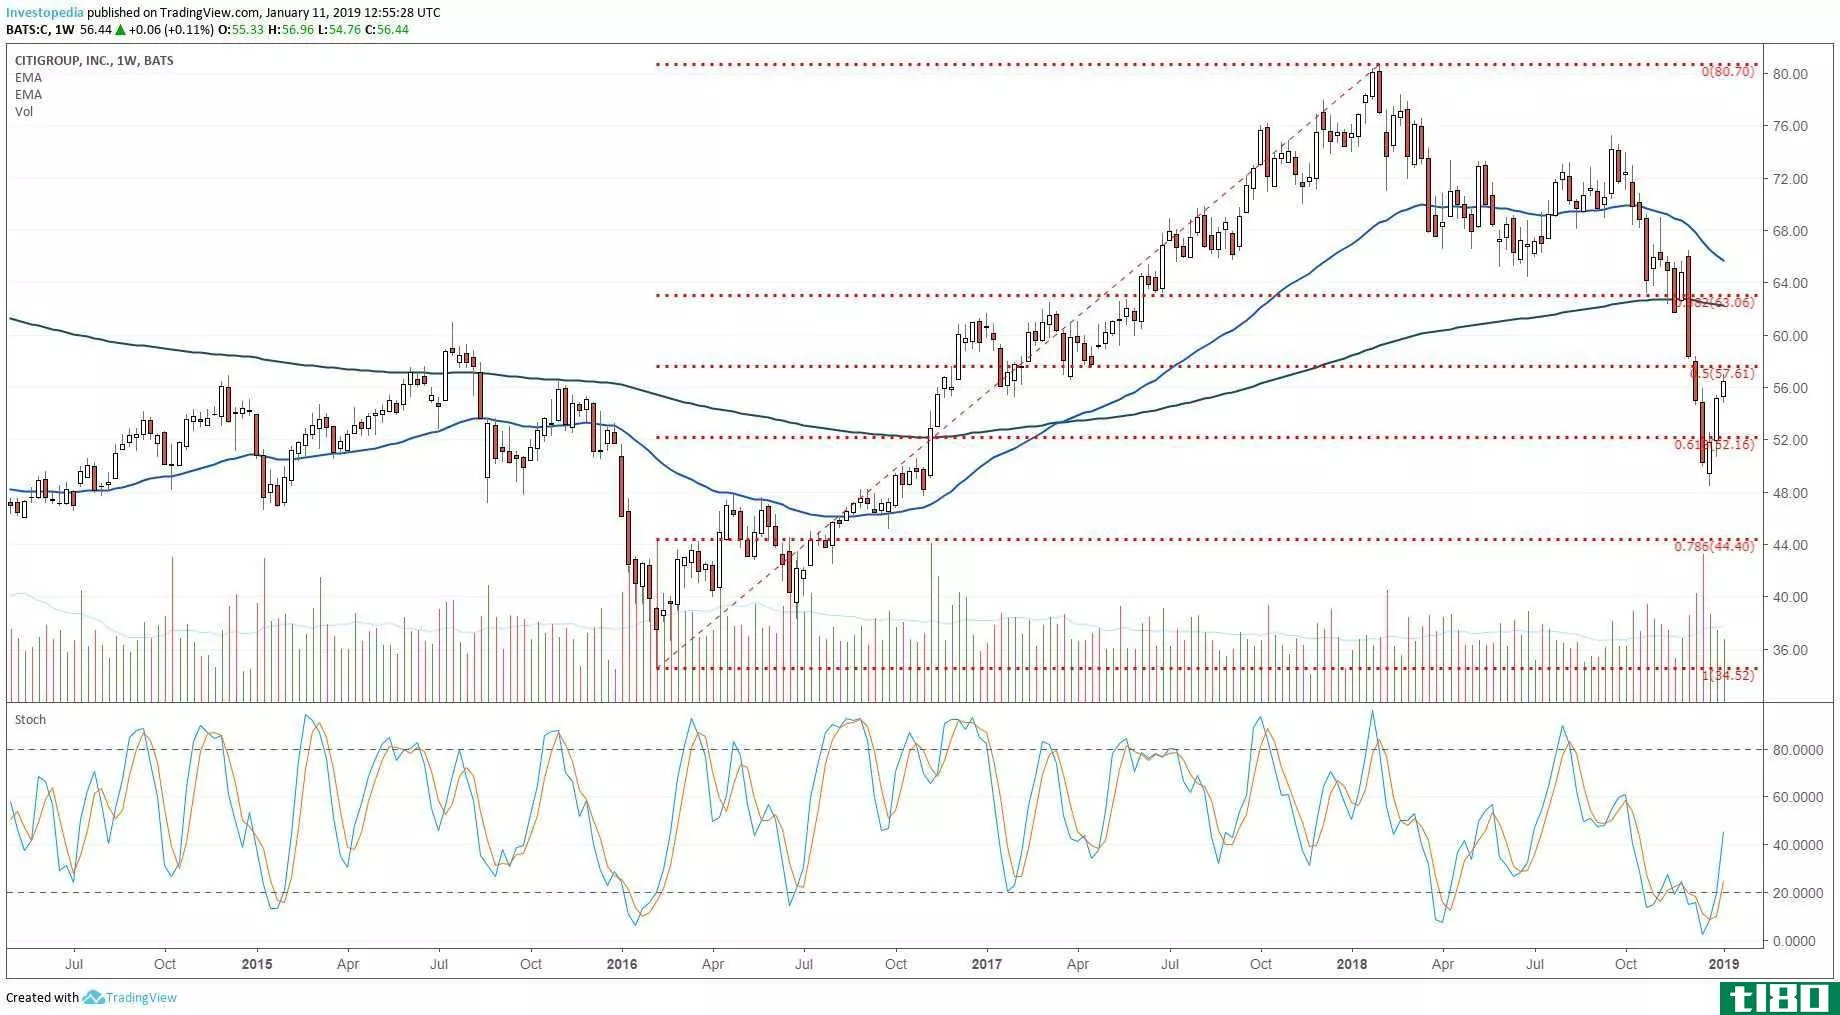 Weekly technical chart showing the share price performance of Citigroup Inc. (C)